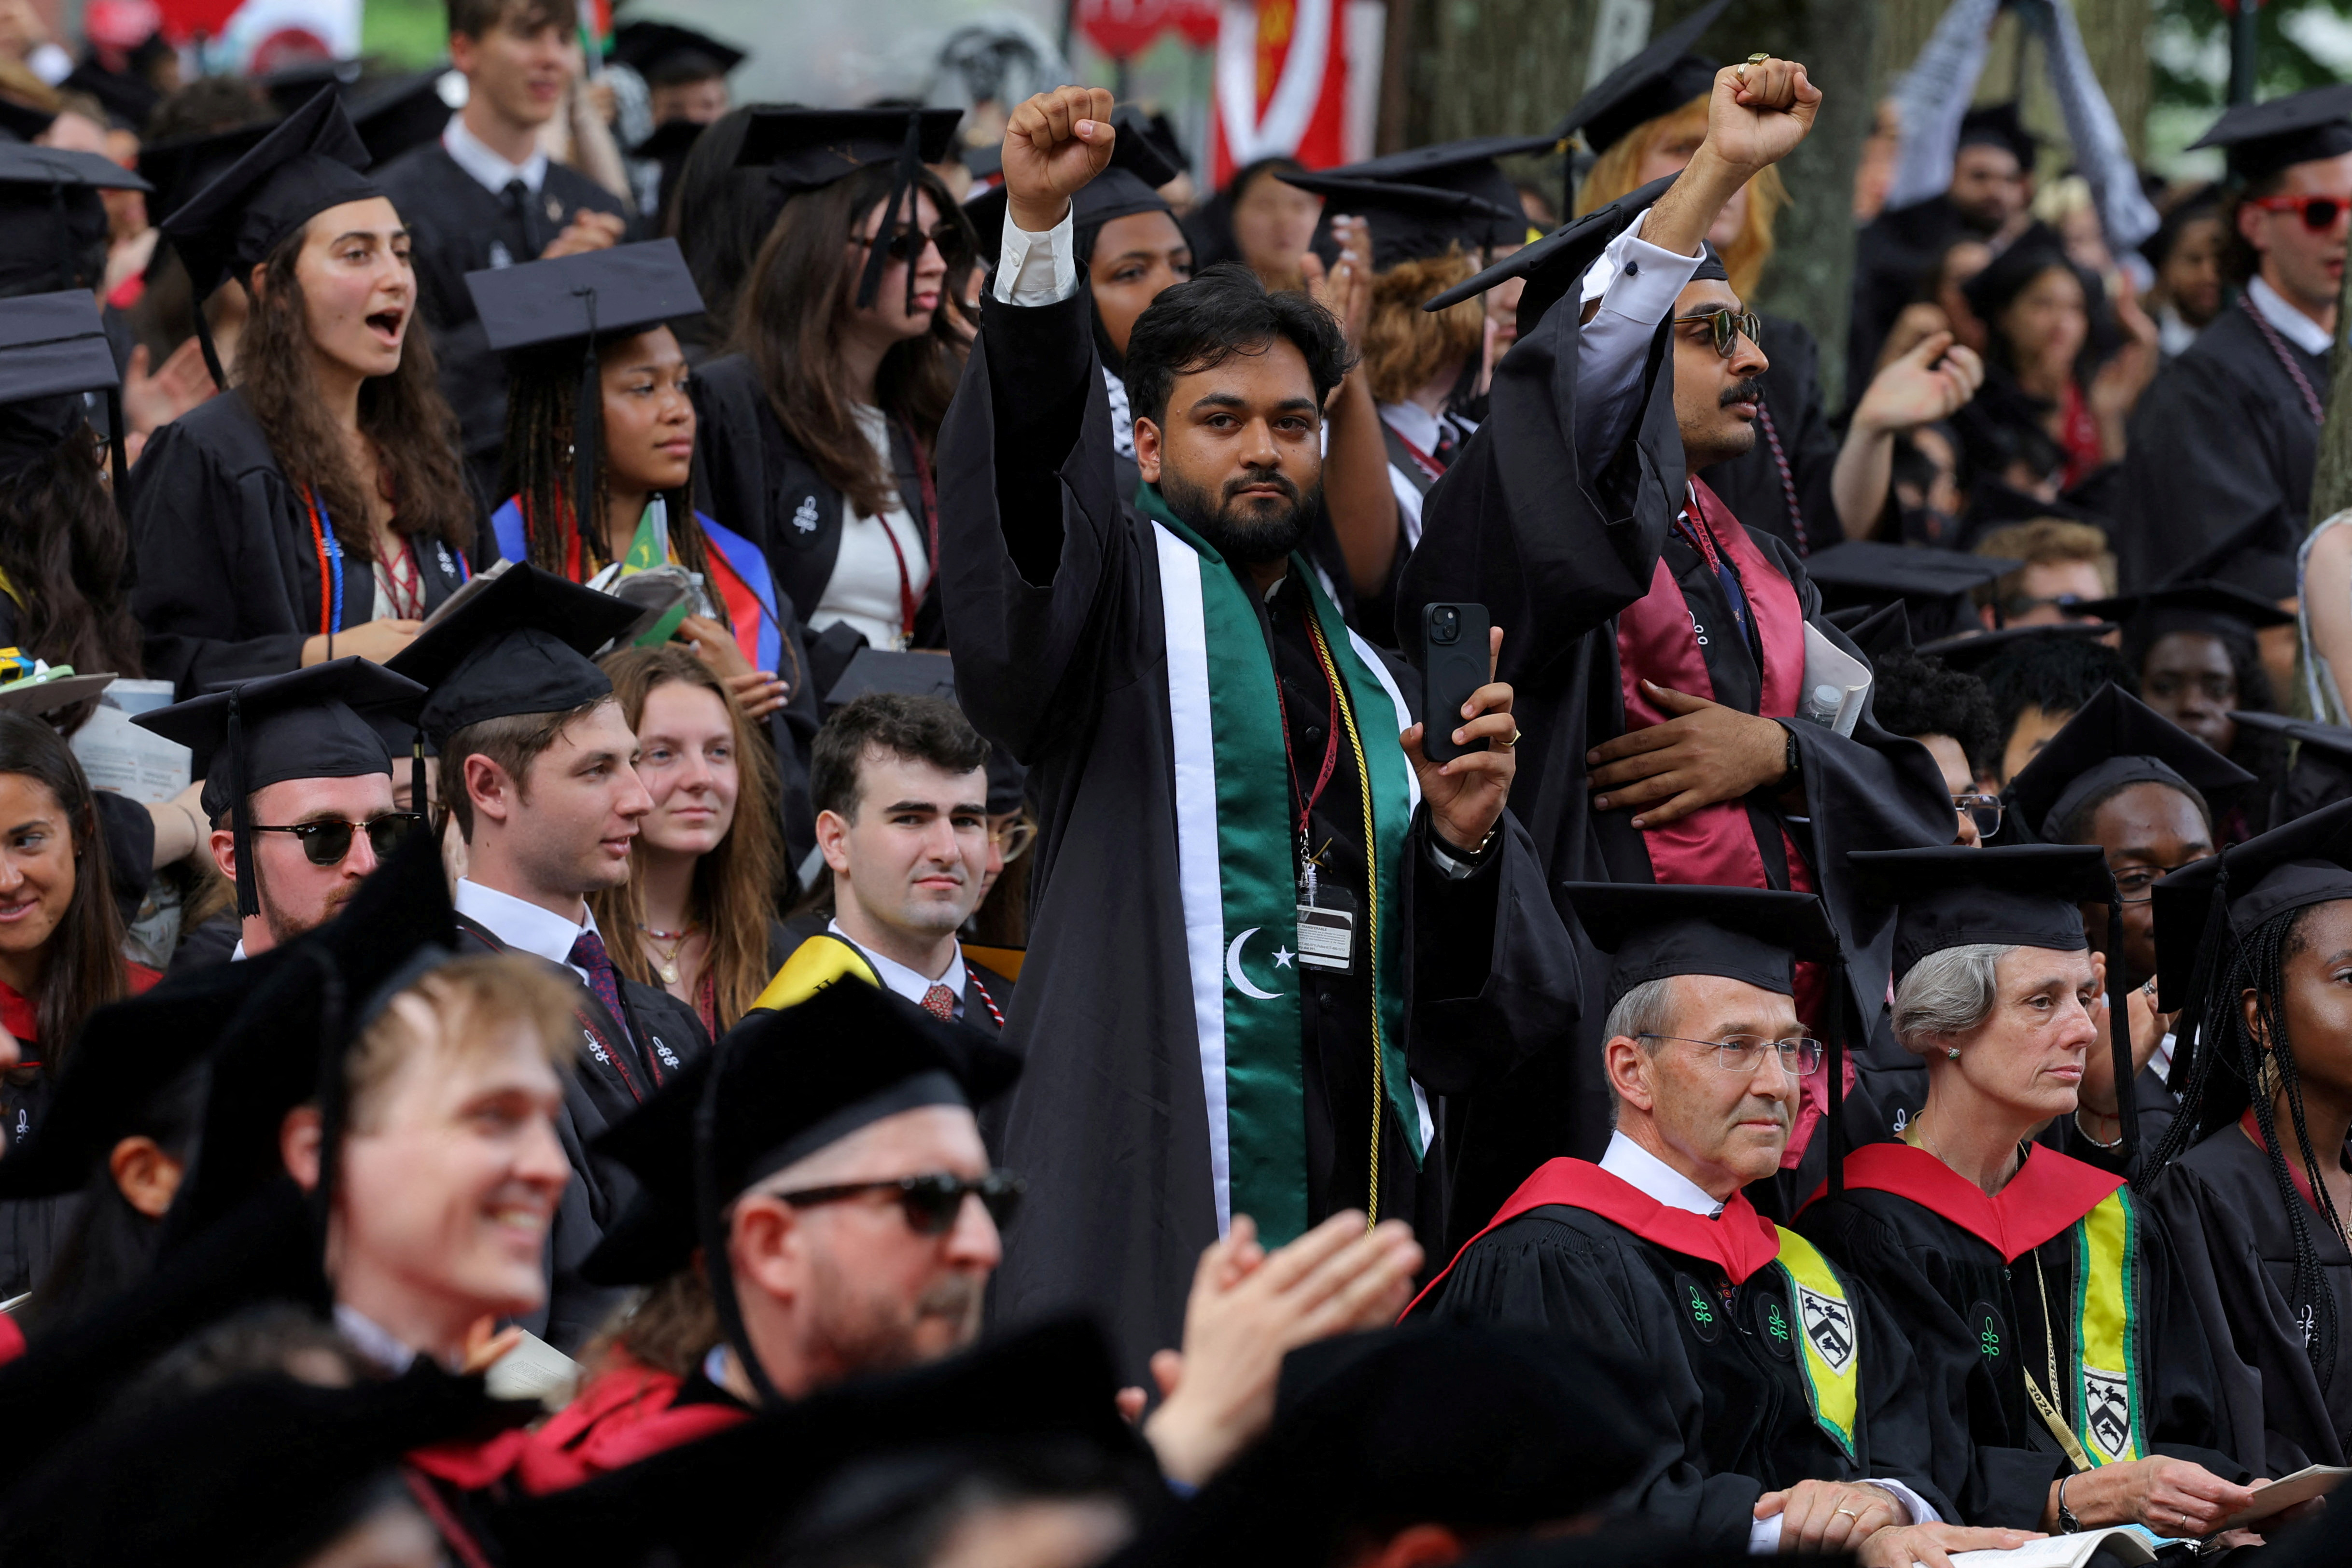 373rd Commencement Exercises at Harvard University in Cambridge